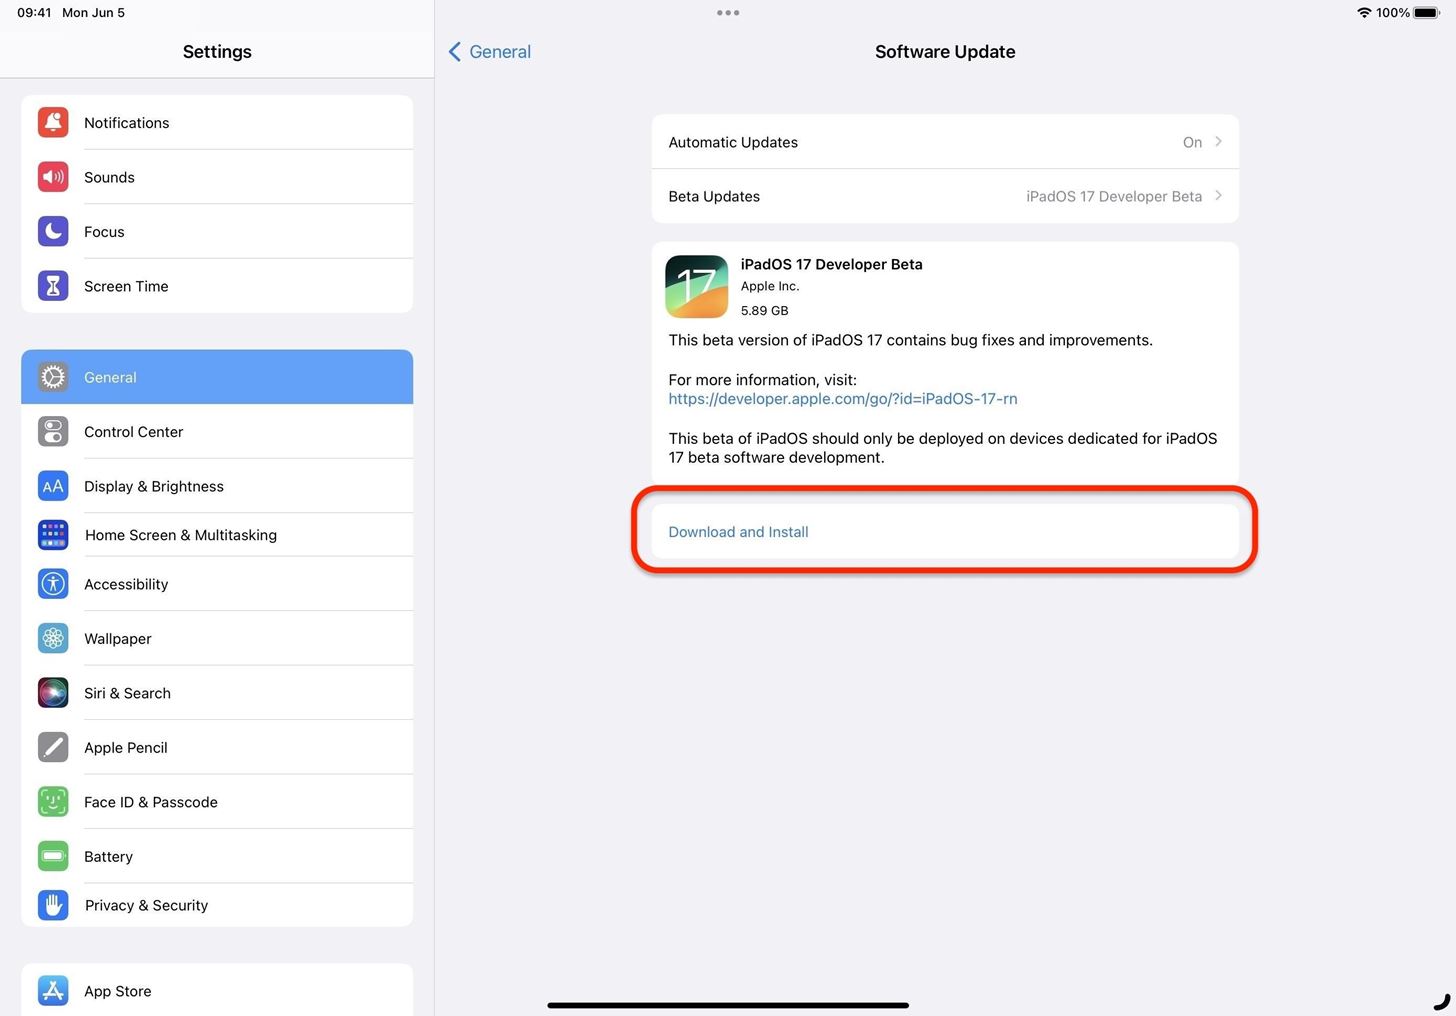 How to Download and Install iPadOS 17.1 Beta to Try New iPad Features Before Everyone Else